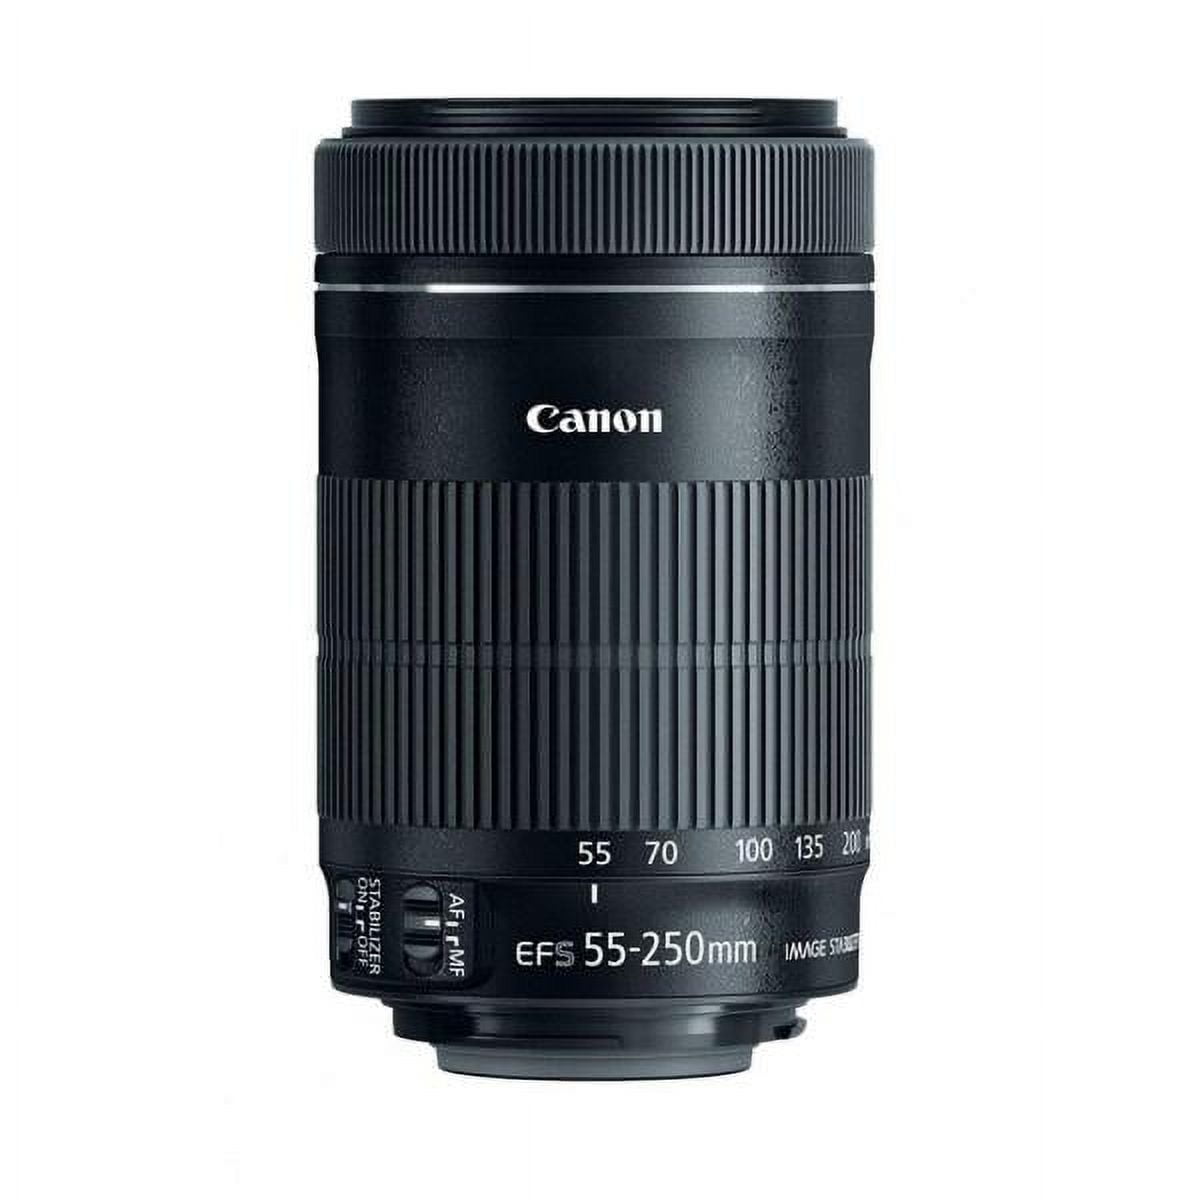 Canon EF-S 55-250mm f/4-5.6 IS Telephoto Zoom Lens for SLR Cameras